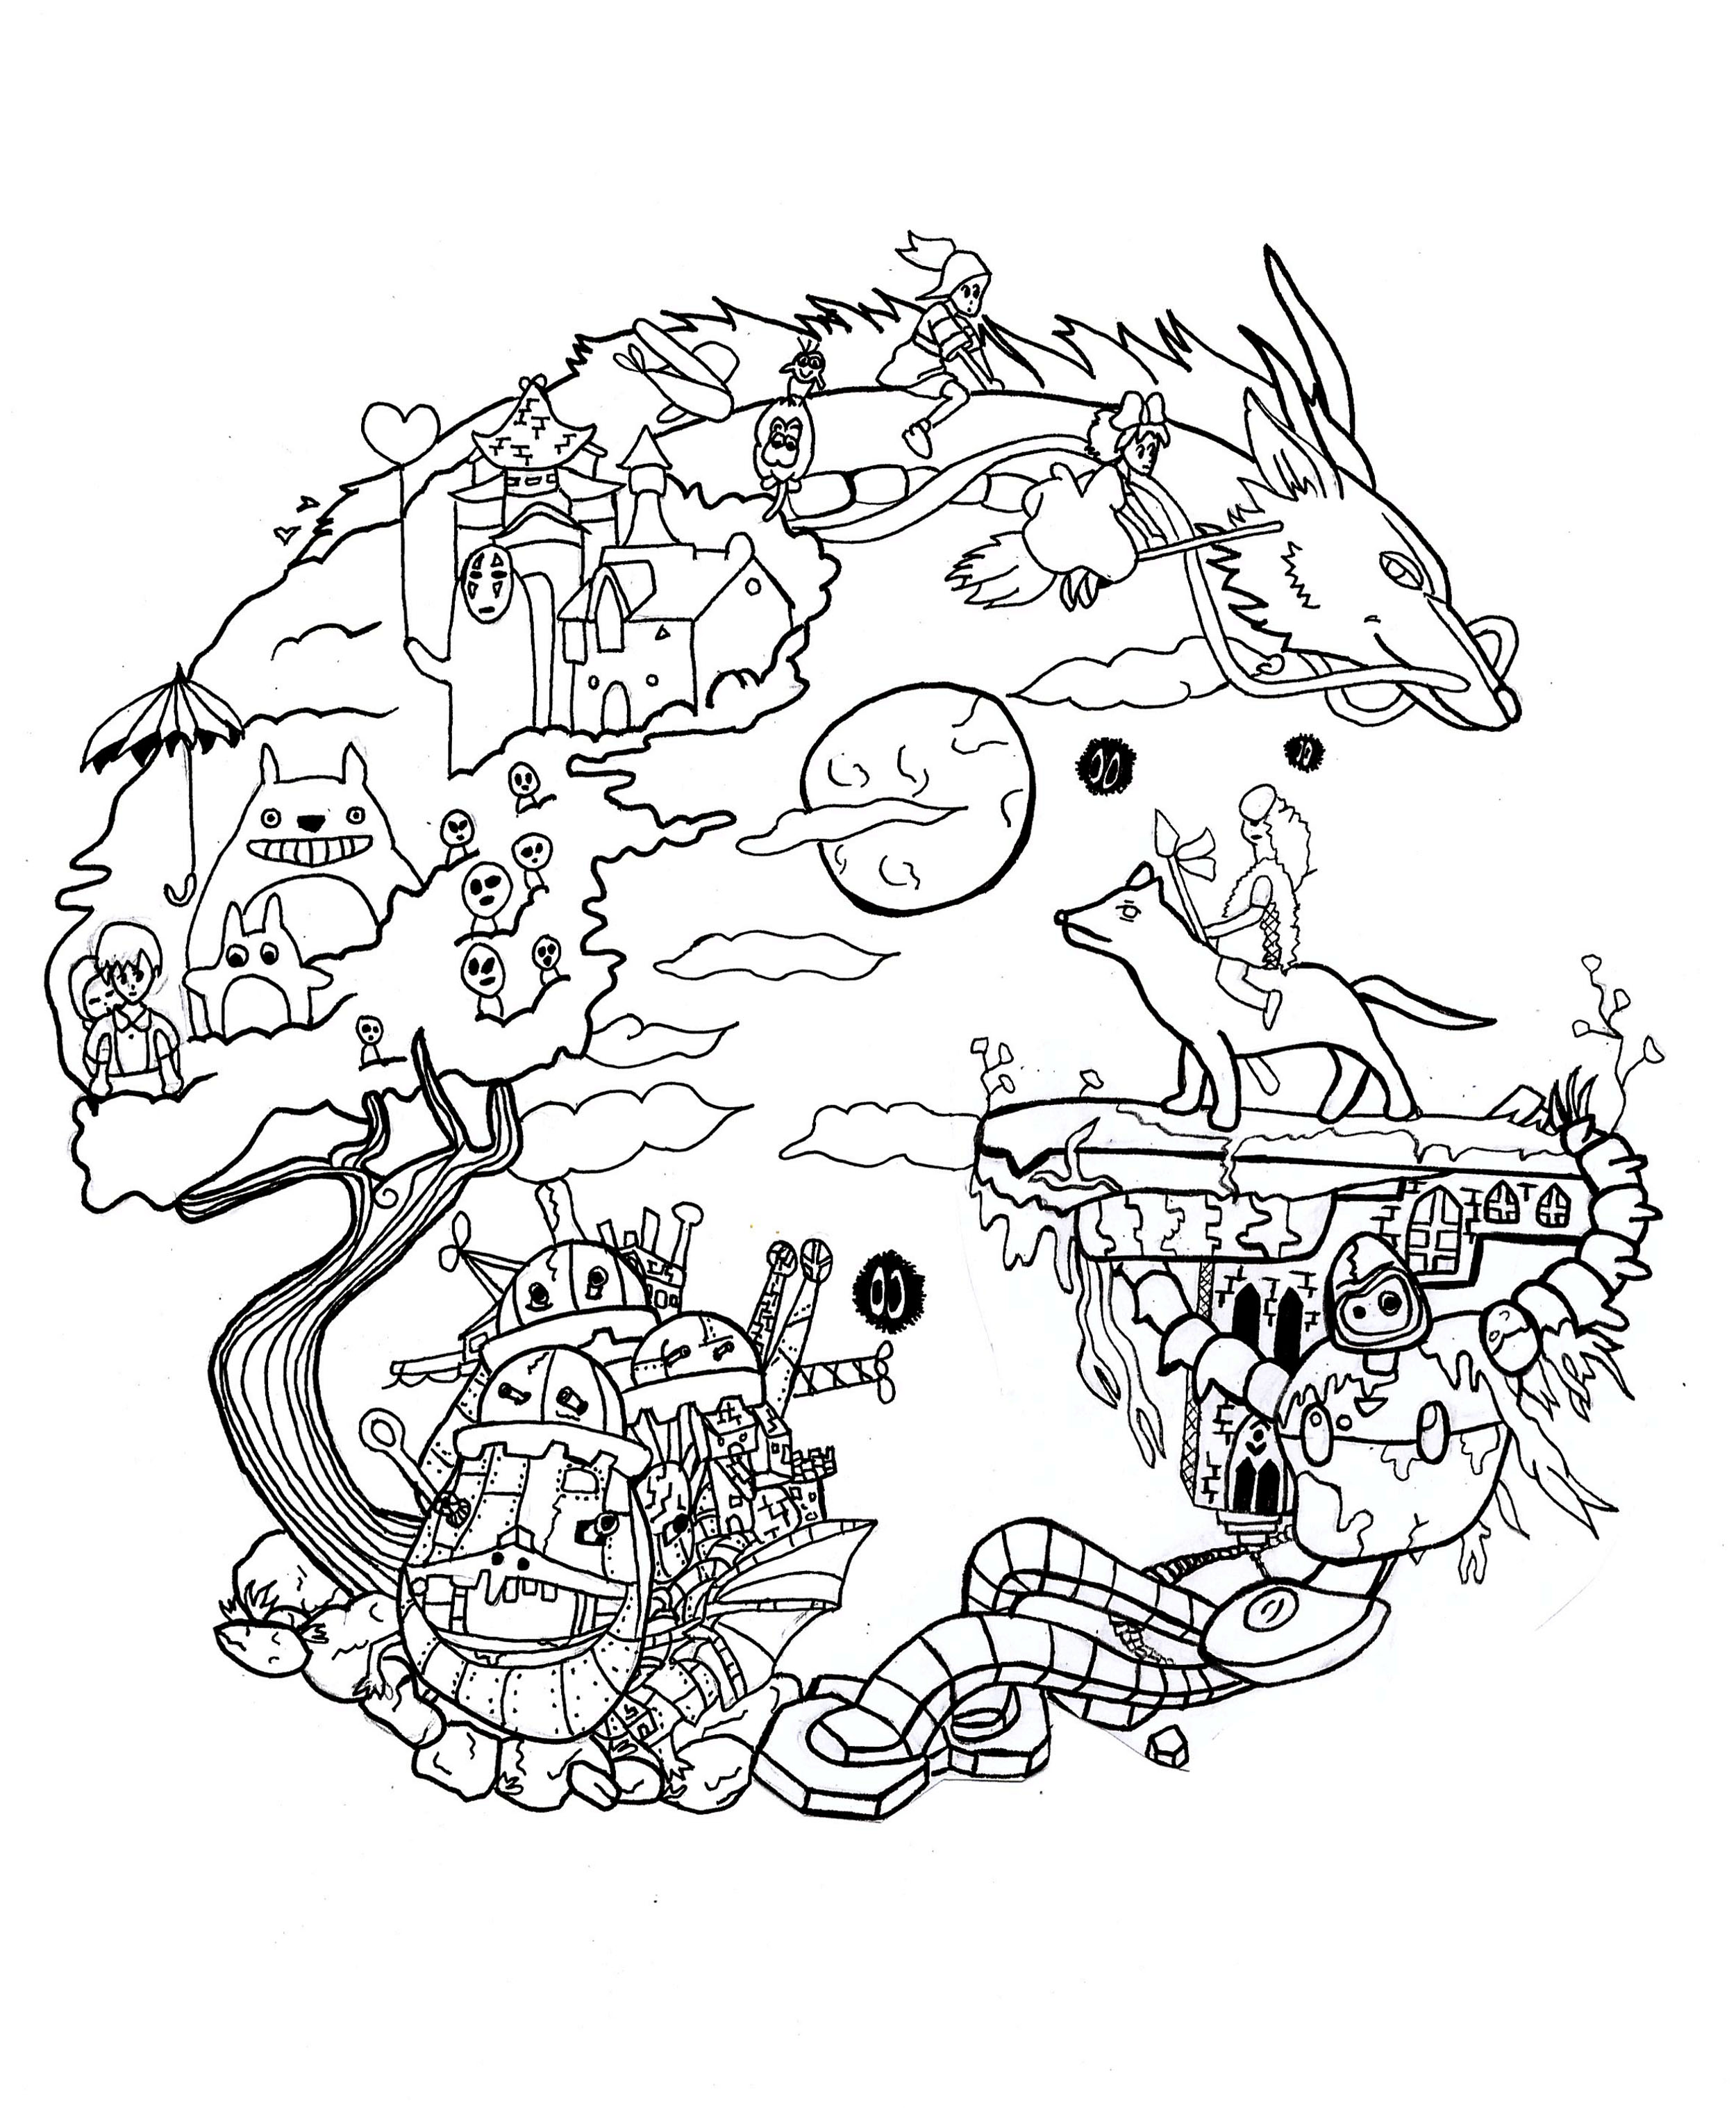 Mandala inspired by the Studio Ghibli famous characters. These animals are ready to be colored in this incredible Mandala, you can print it and let your creativity guide you.